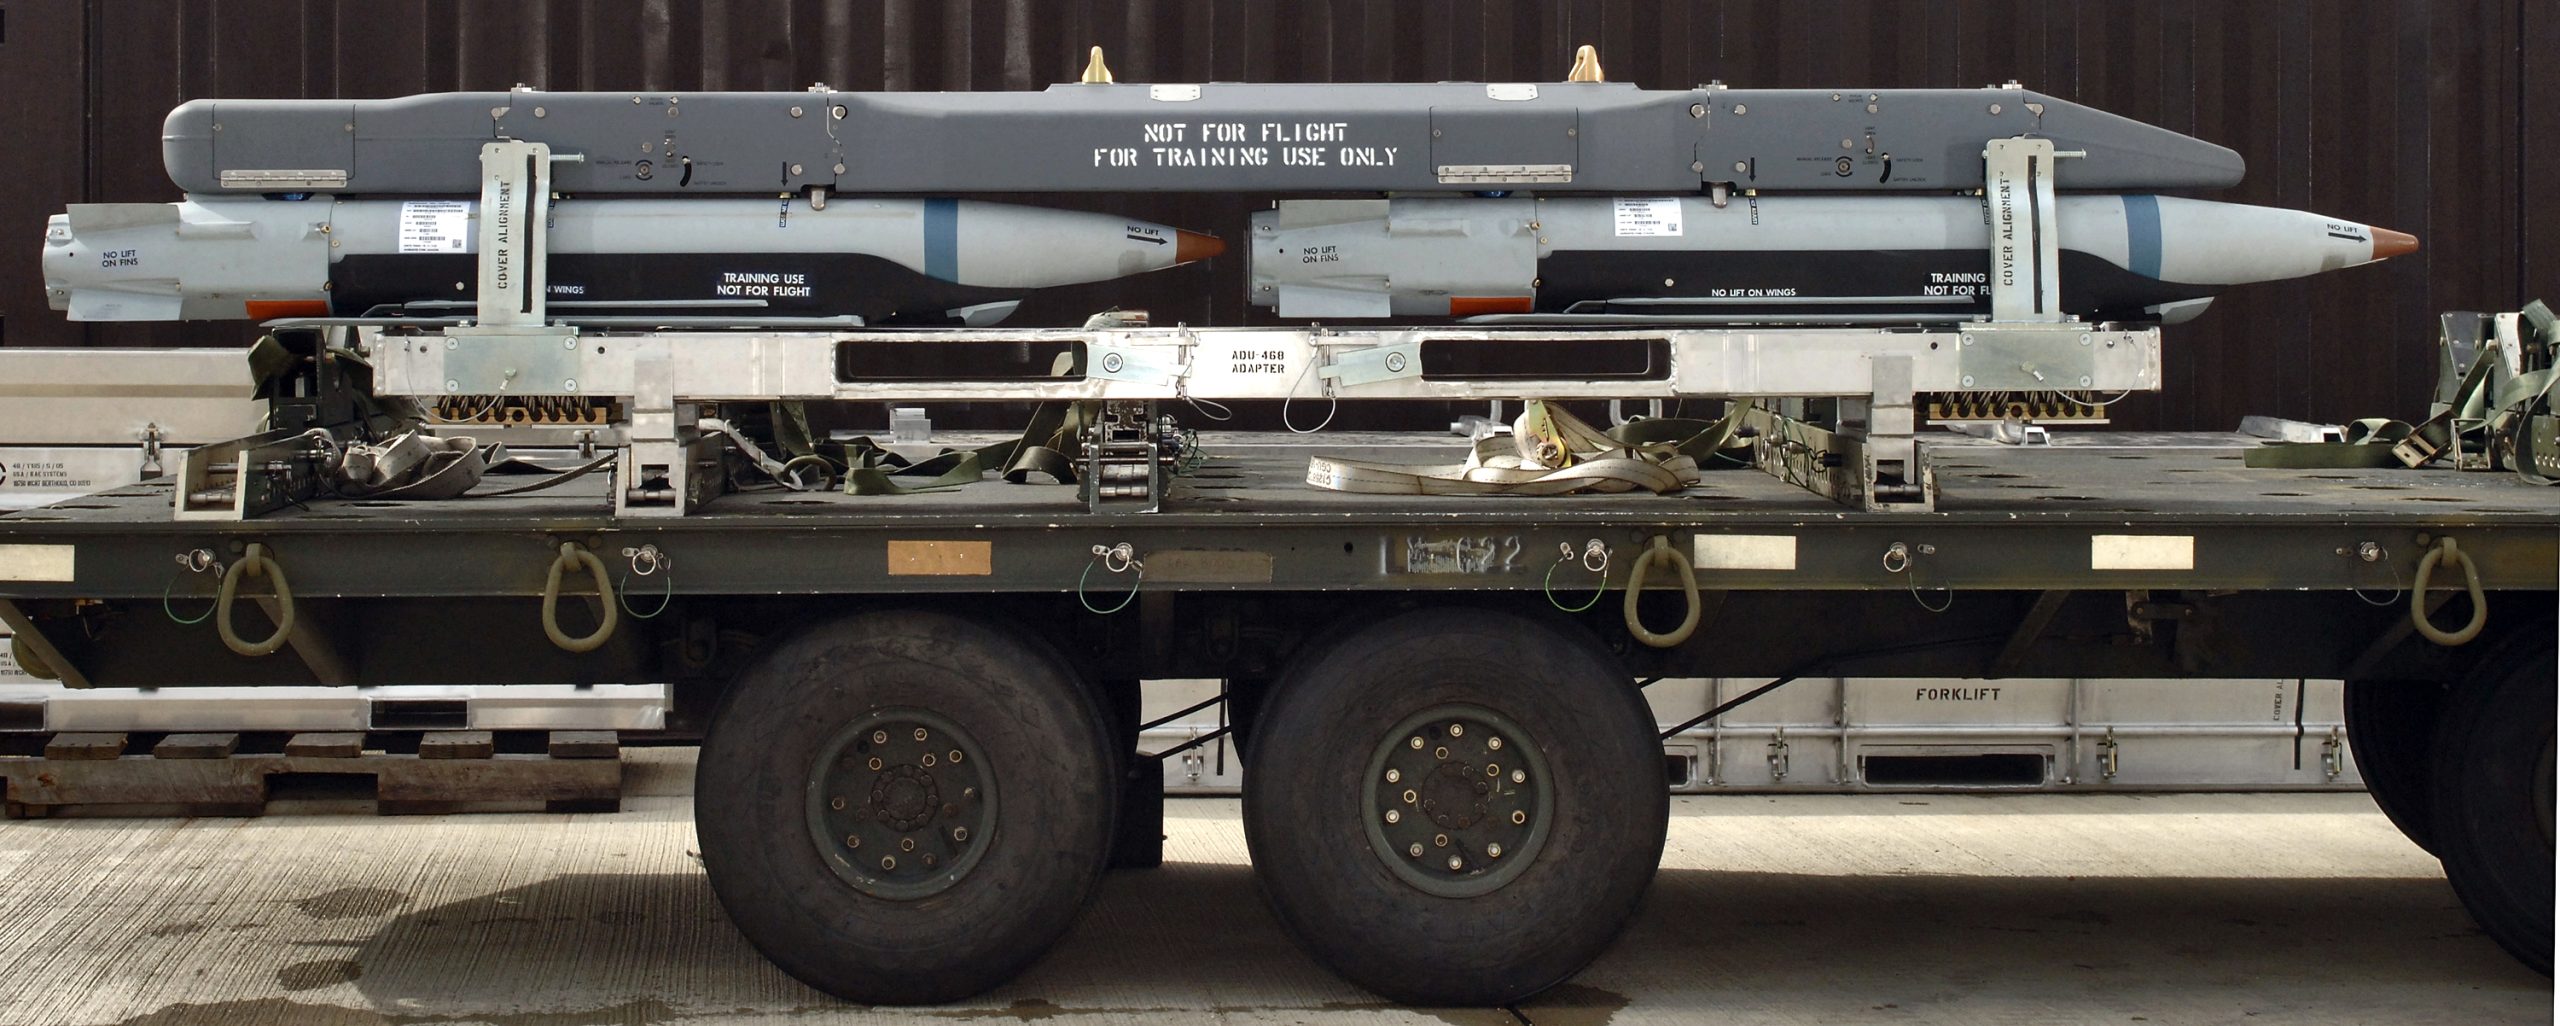 The Bomb Rack Unit 61 with carrier and four ground-training Guided Bomb Unit-39 small-diameter bombs on this munitions trailer undergoes testing at Royal Air Force Lakenheath, England.